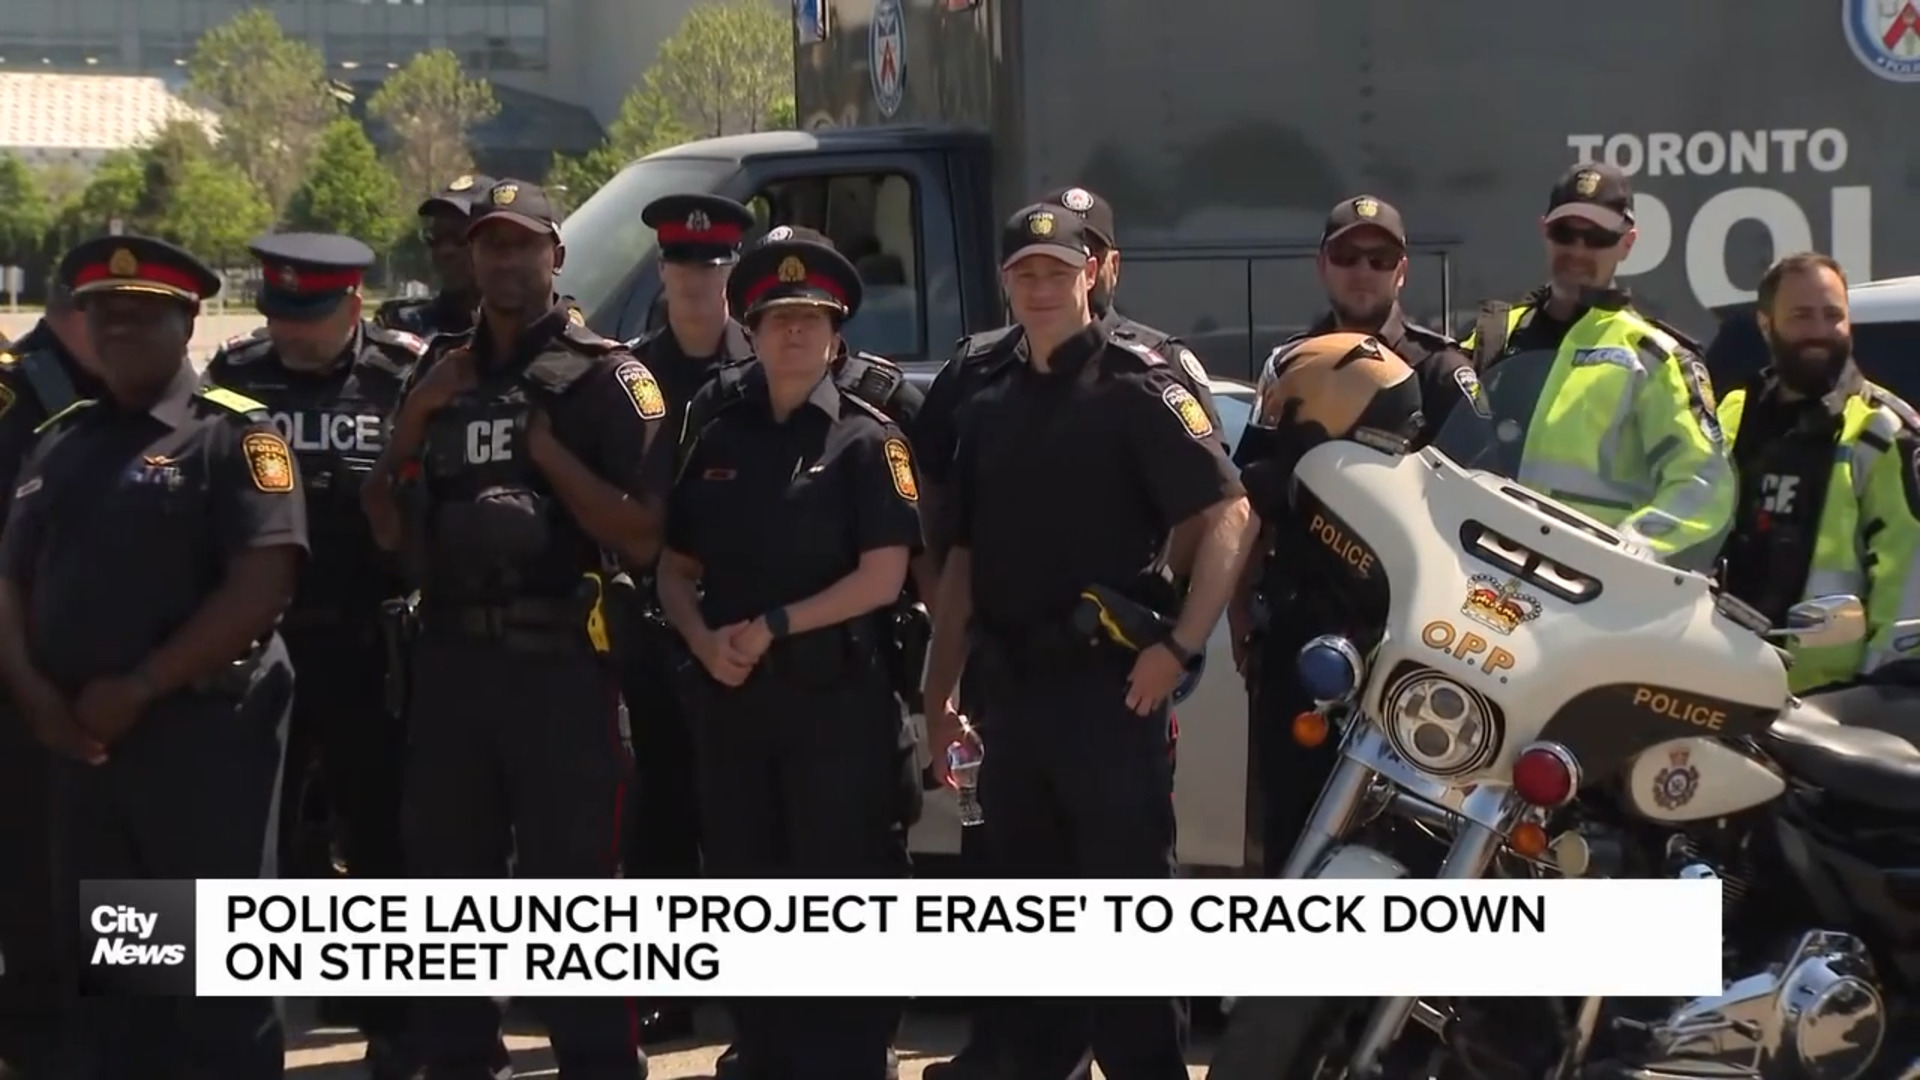 Police launch 'project erase' to crack down on street racing